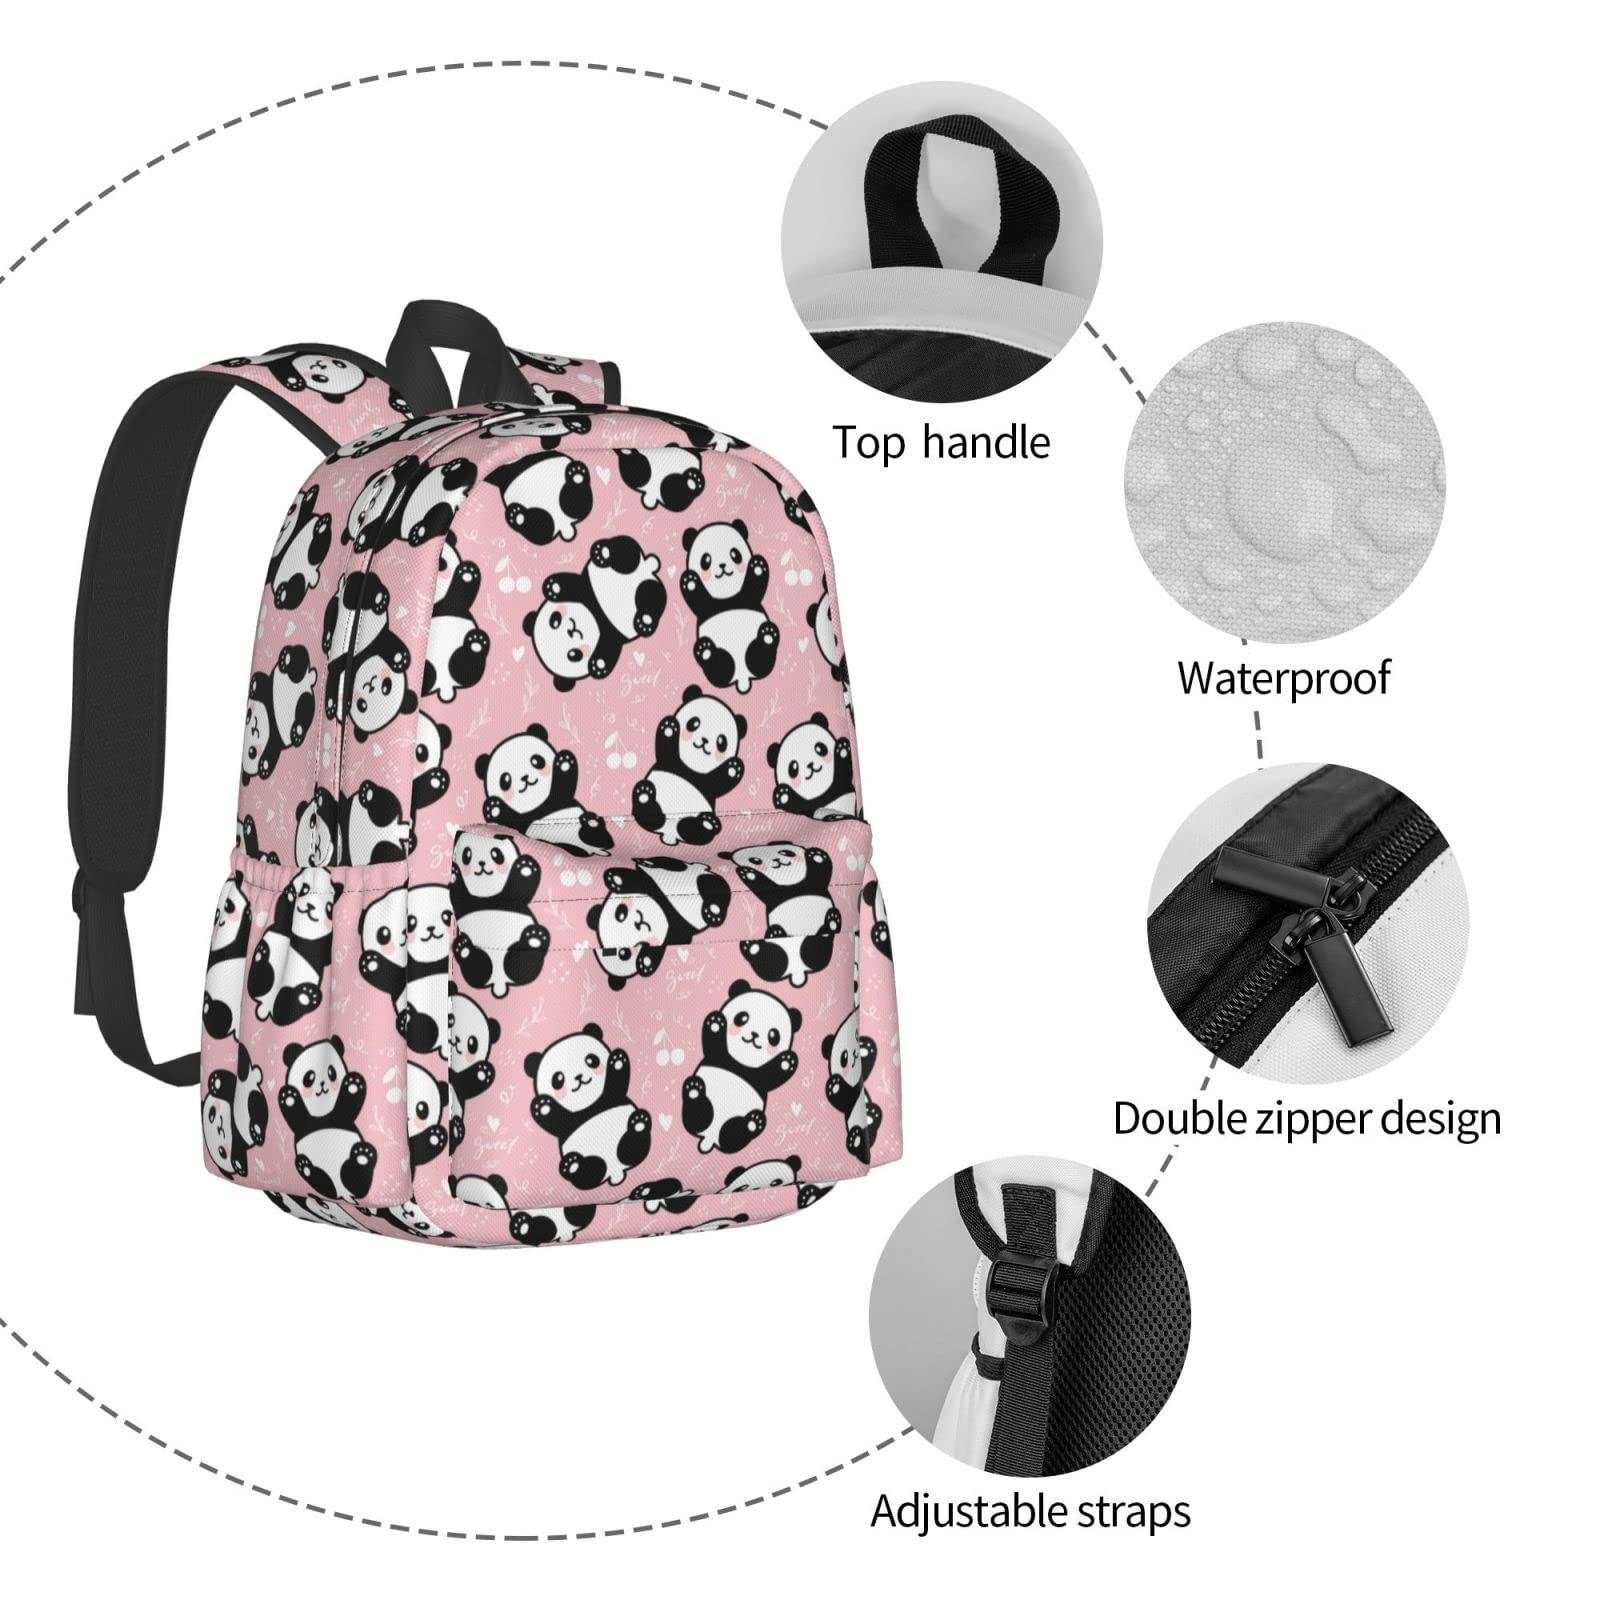 YISHOW 17 Inch Backpack With Adjustable Shoulder Straps Cute Pandas Lightweight Bookbag Casual Daypack For Travel Work